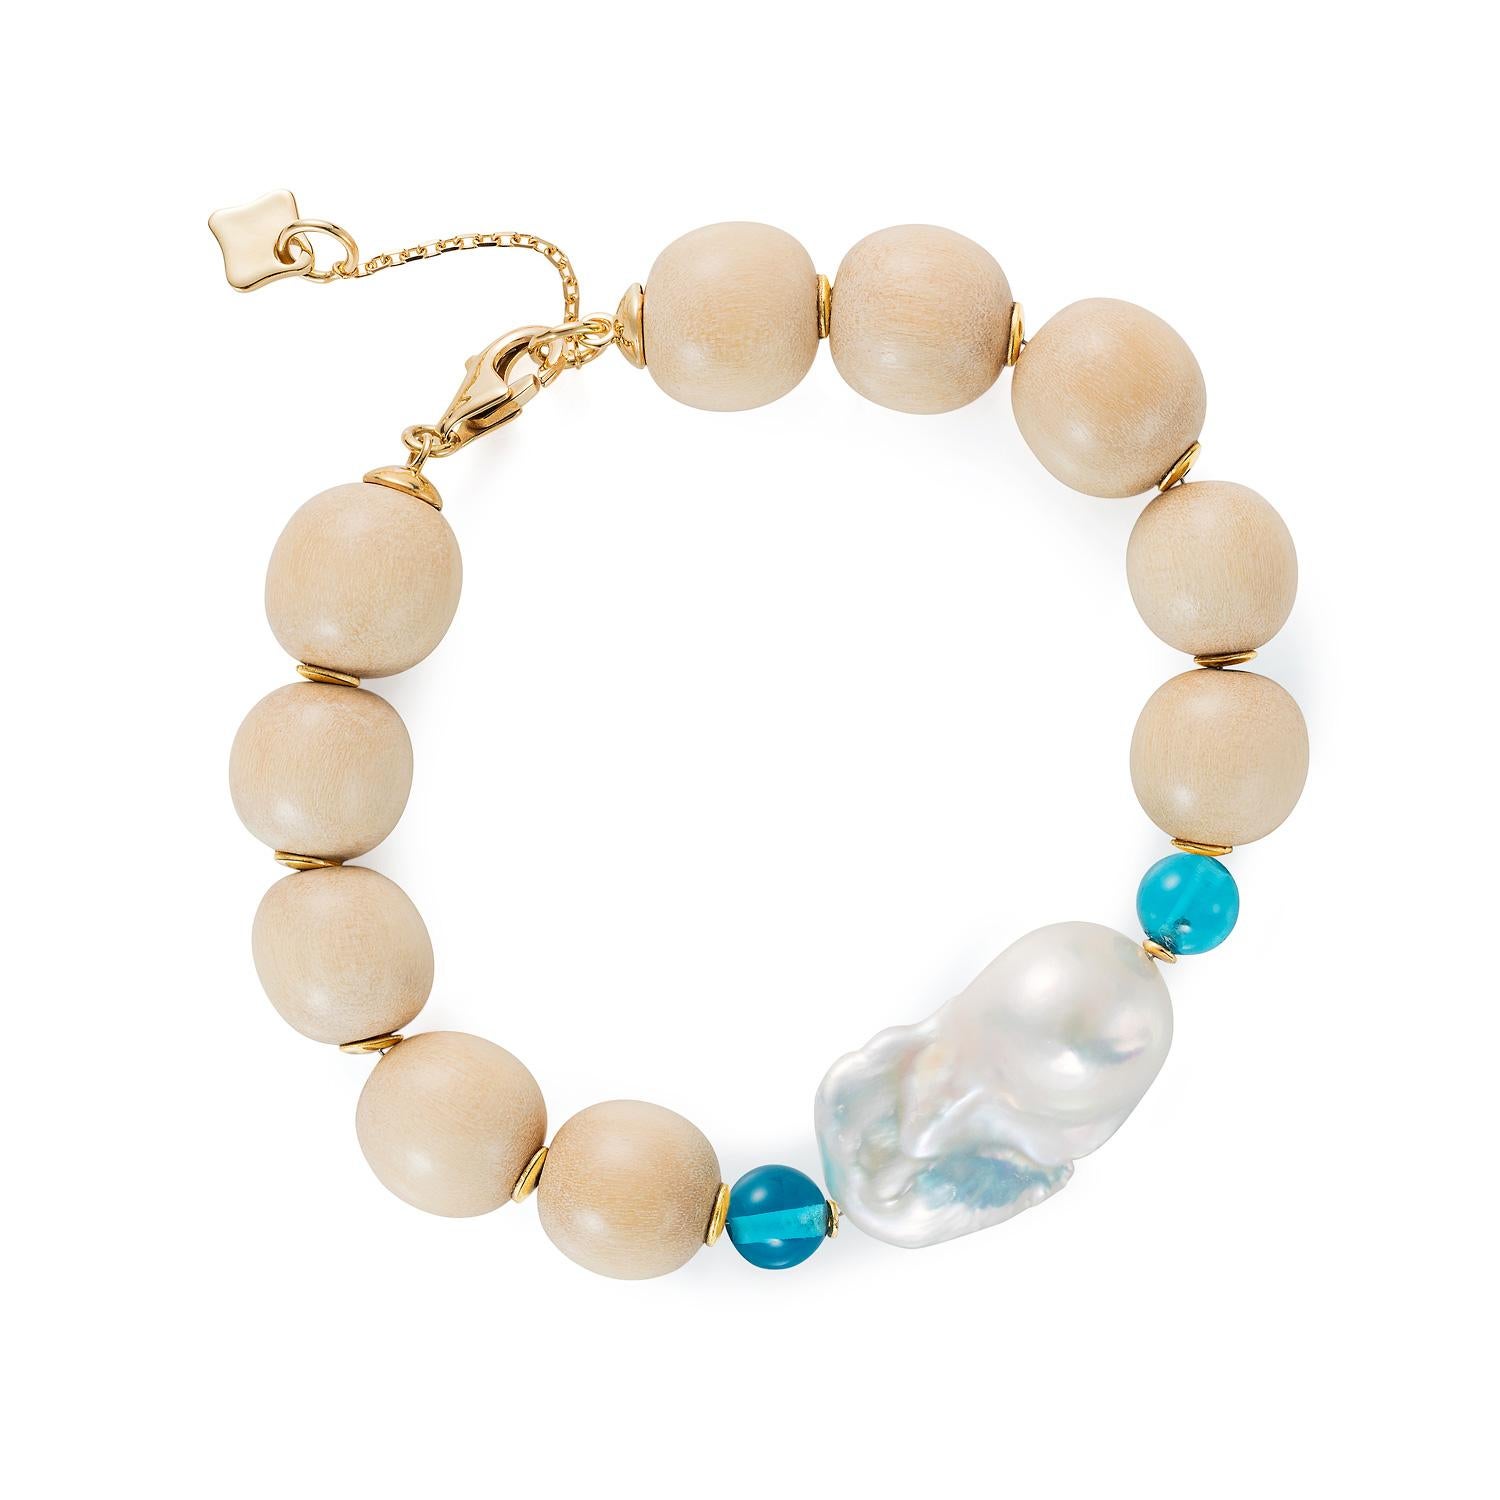 Our Wooden Bracelet Series are meant to be worn layered, showing all the wonderful gemstones, whether they be Turquoise, Baroque Pearls and our colourful gemstones of exceptional quality.

The Turquoise bracelet compromises turquoise stones that are